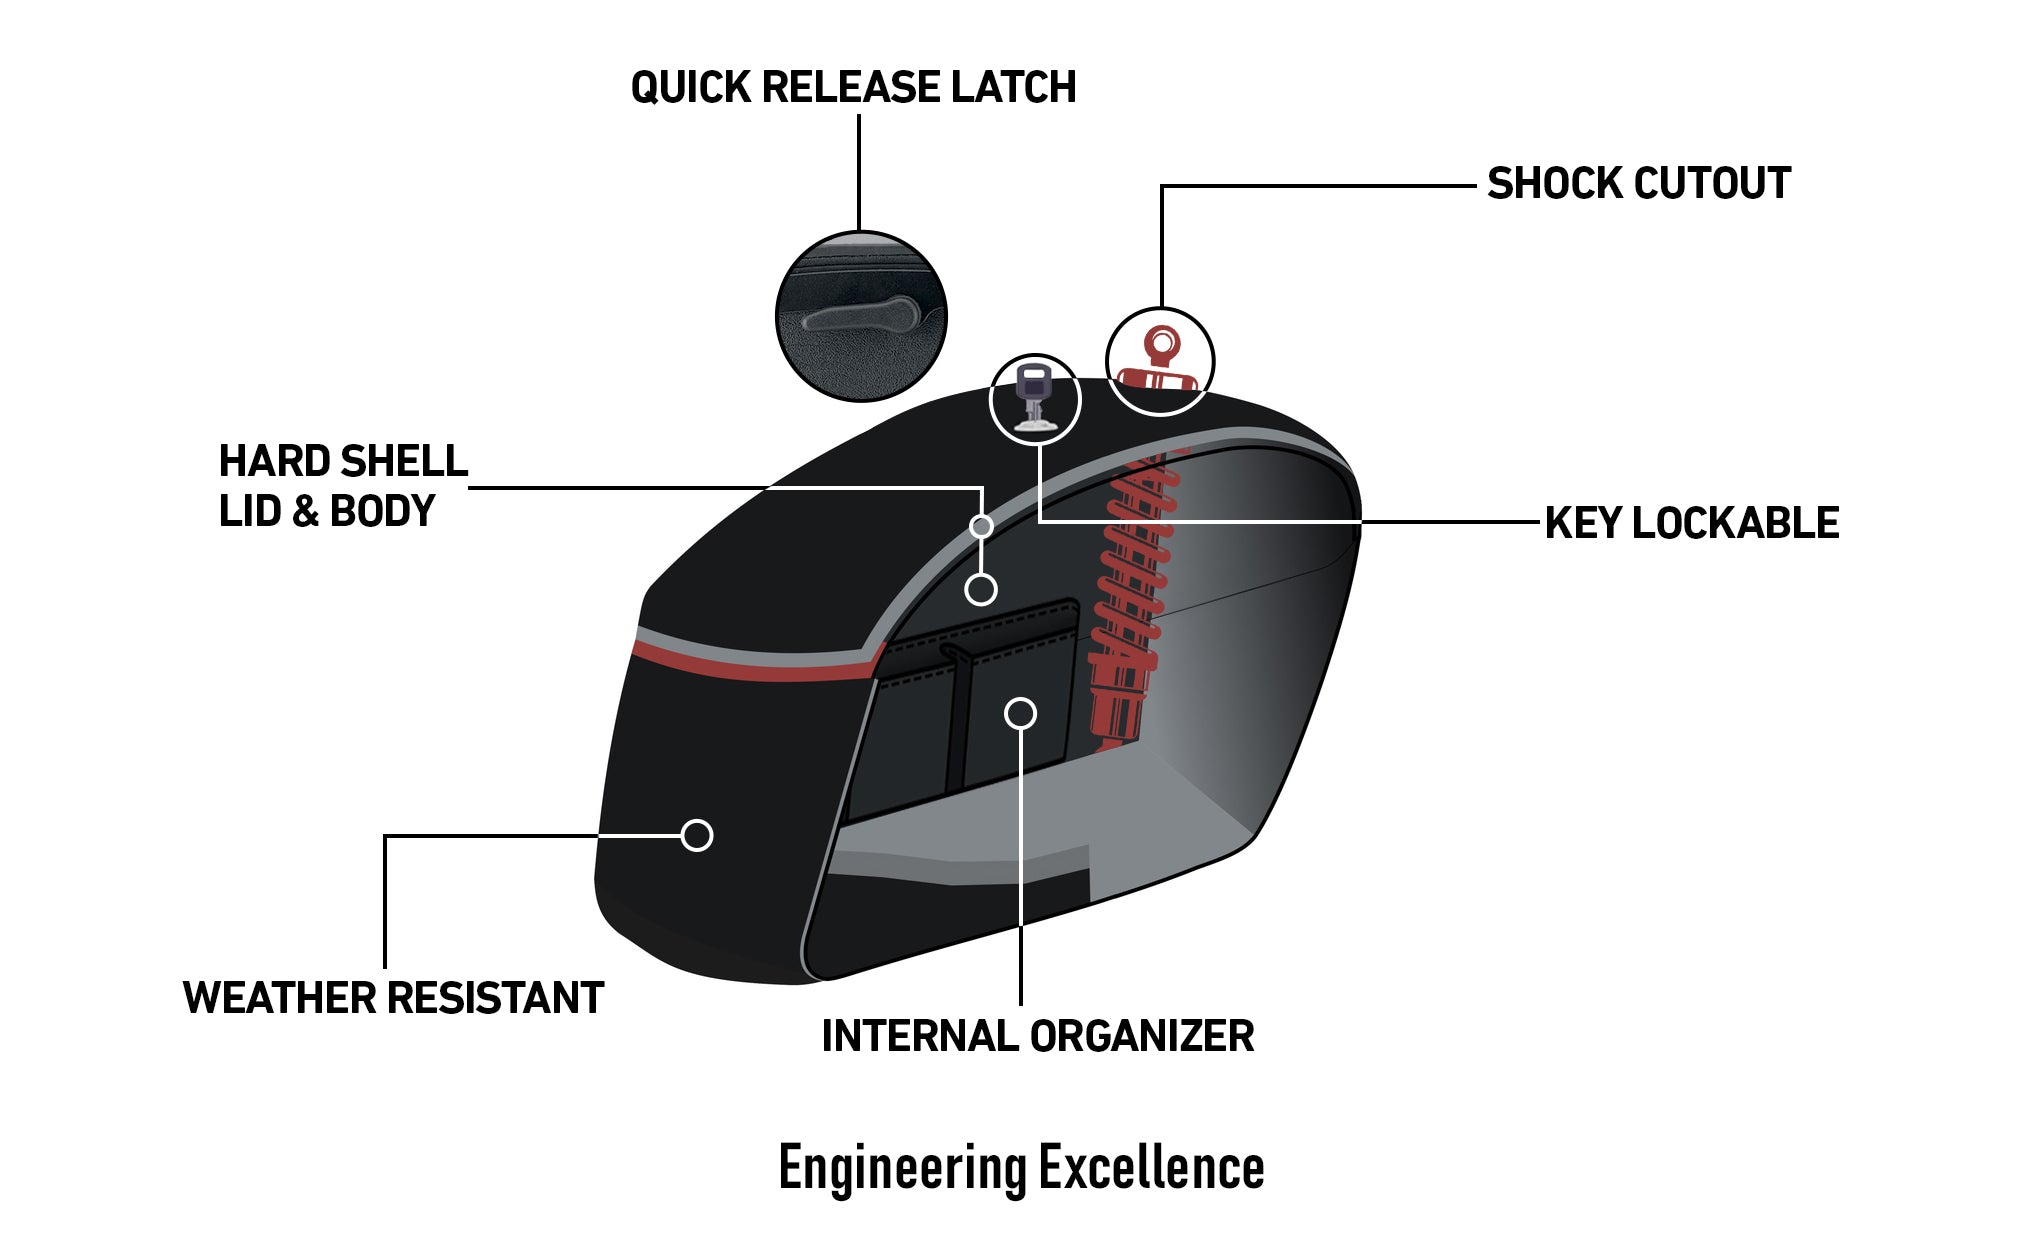 Viking Lamellar Vale Extra Large Shock Cut Out Matte Motorcycle Hard Saddlebags For Harley Dyna Switchback Fld Engineering Excellence with Bag on Bike @expand